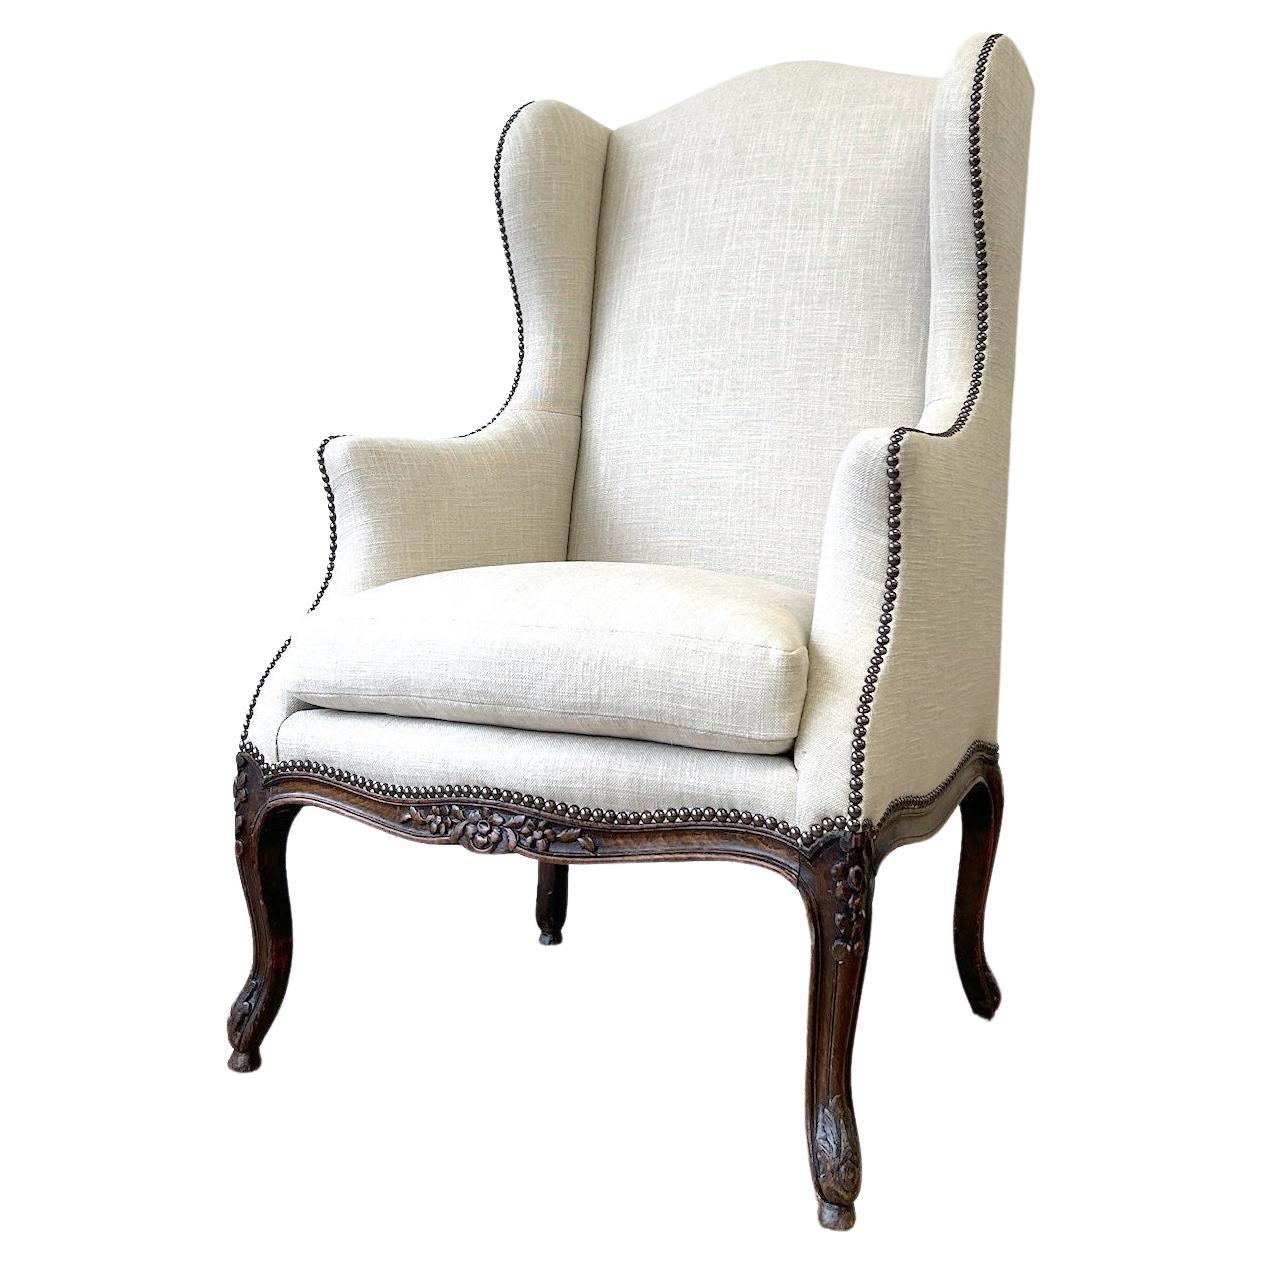 An Antique French Arm Chair with New Kravet Linen Upholstery For Sale